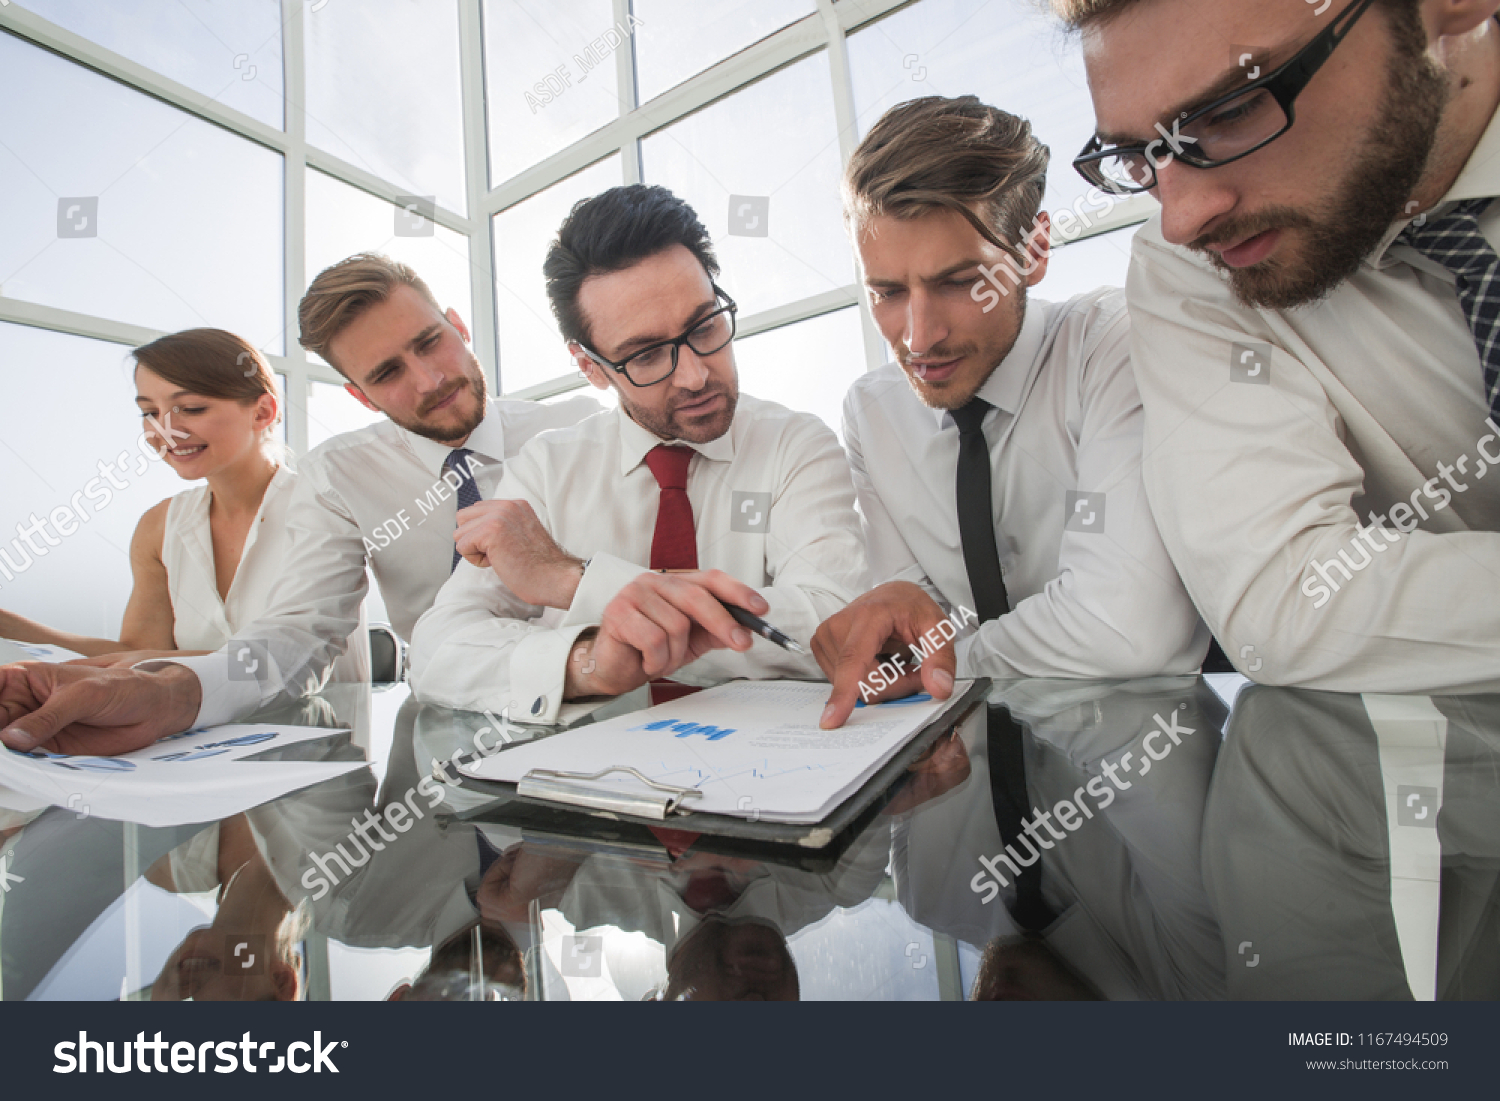 business team discussing financial documents #1167494509